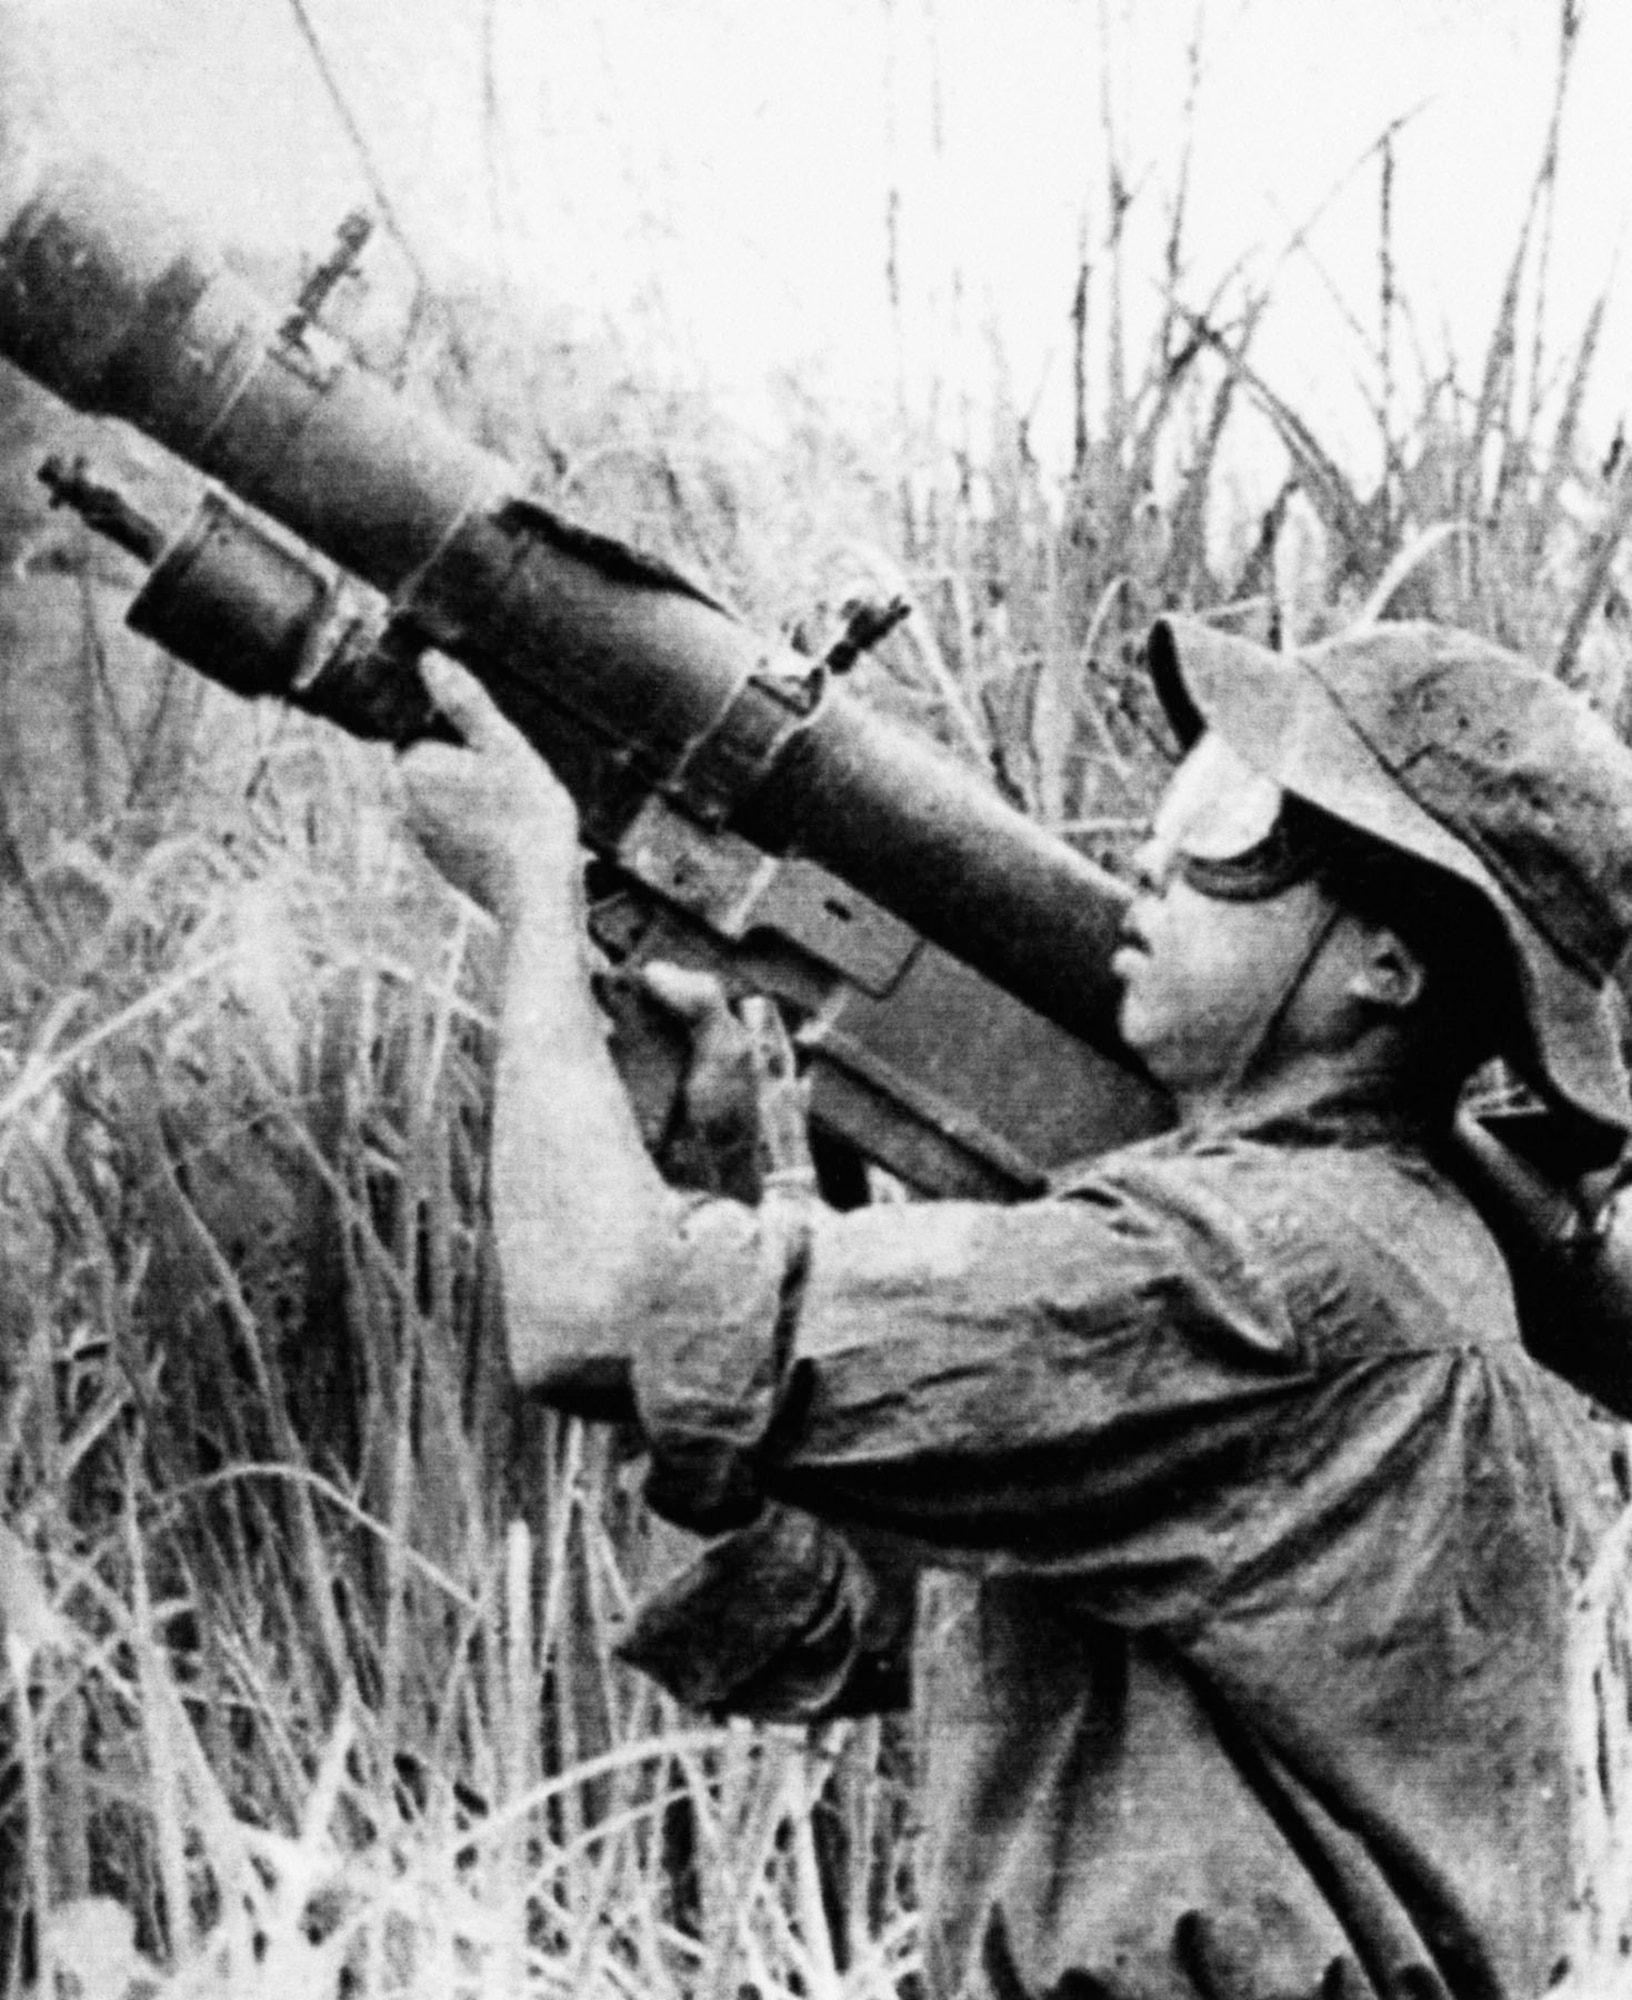 North Vietnamese soldier preparing to fire an SA-7 surface-to-air missile. (U.S. Air Force photo)